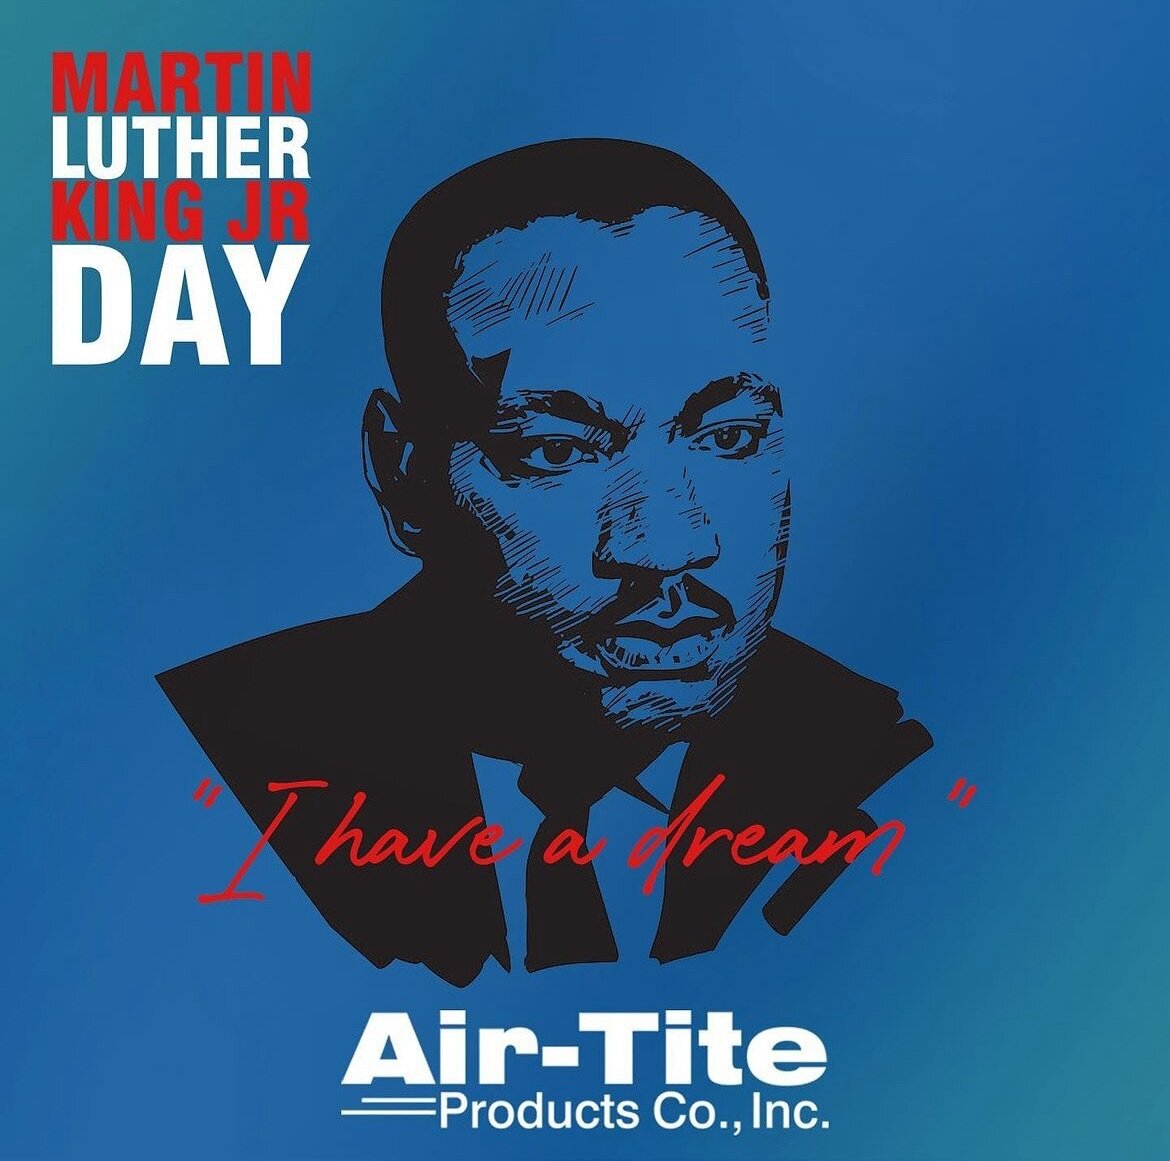 &ldquo;The time is always right to do what is right.&rdquo; - Dr. Martin Luther King Jr.

#MLK #MLKDay #MartinLutherKing #MartinLutherKingJr #MartinLutherKingDay